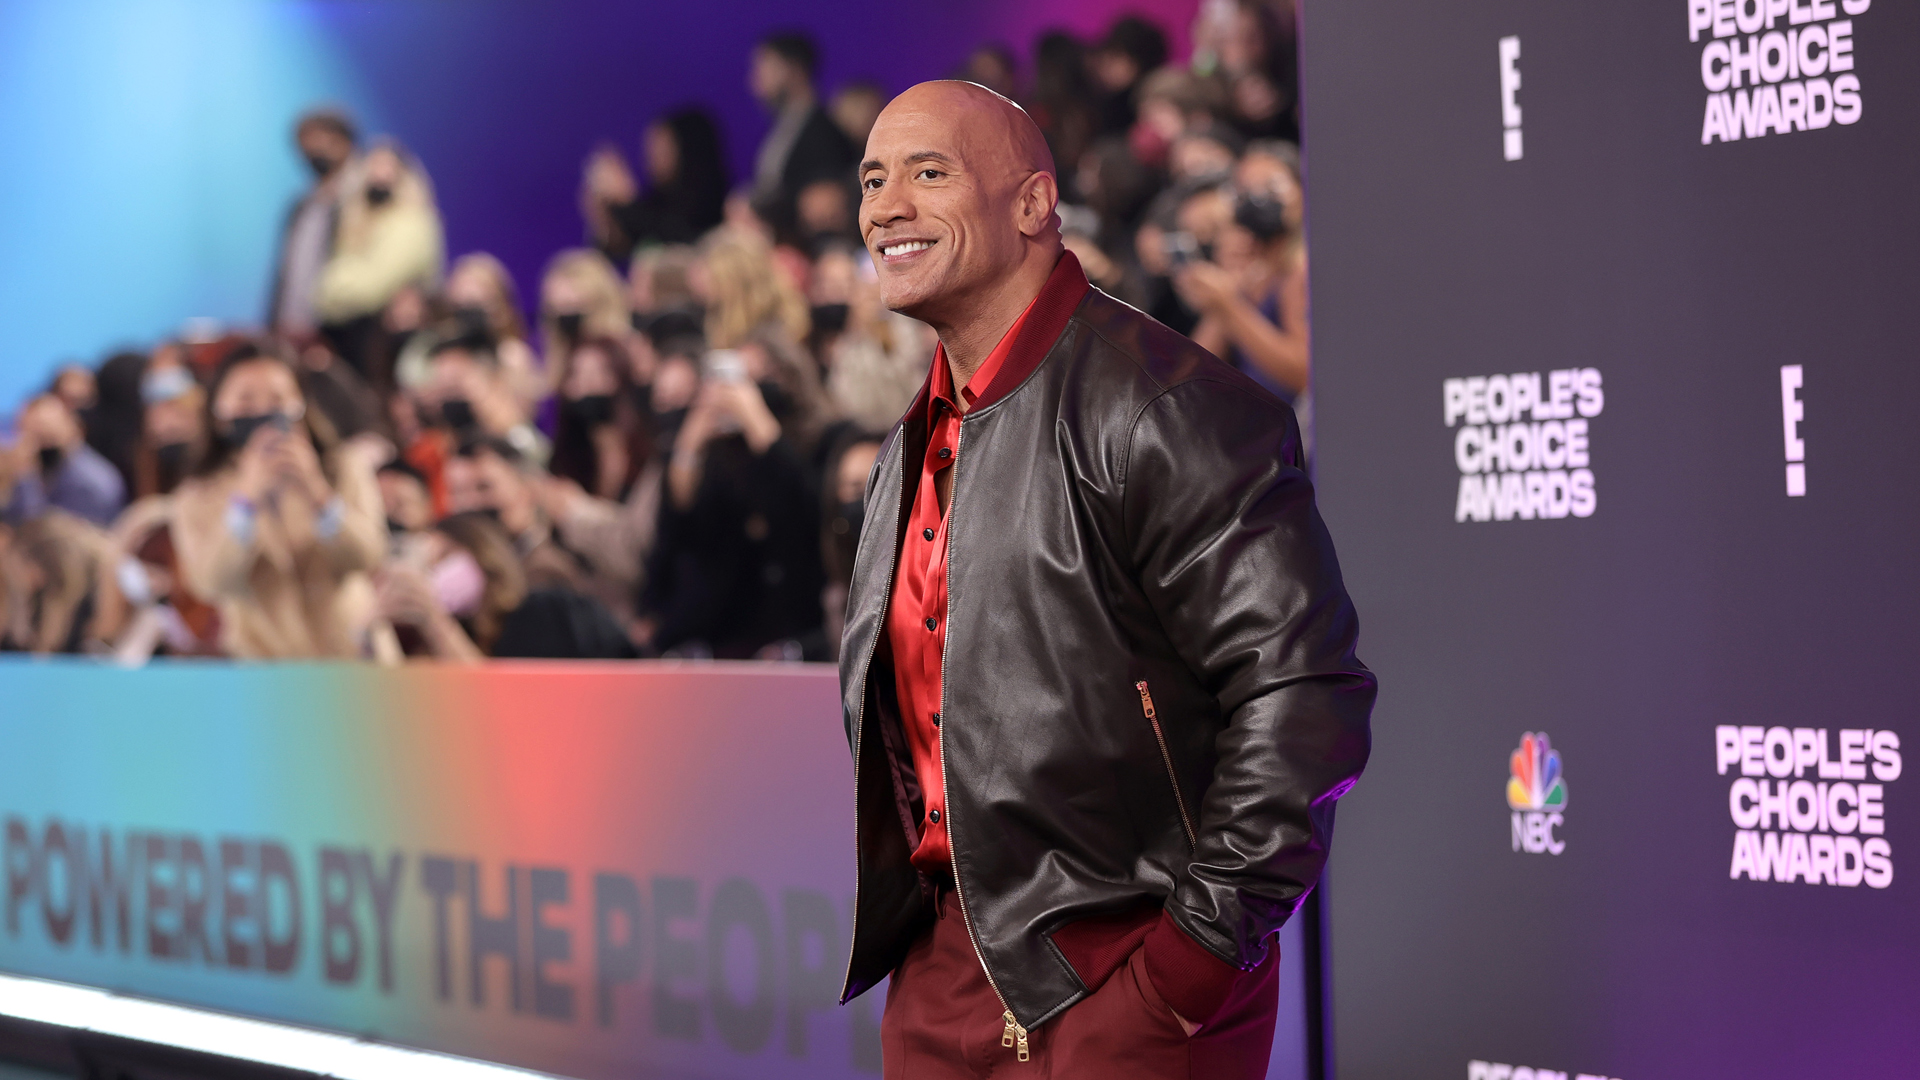 THE ROCK IS MAKING A VIDEO GAME MOVIE BASED OFF A GAME HE'S PLAYED FOR  YEARS